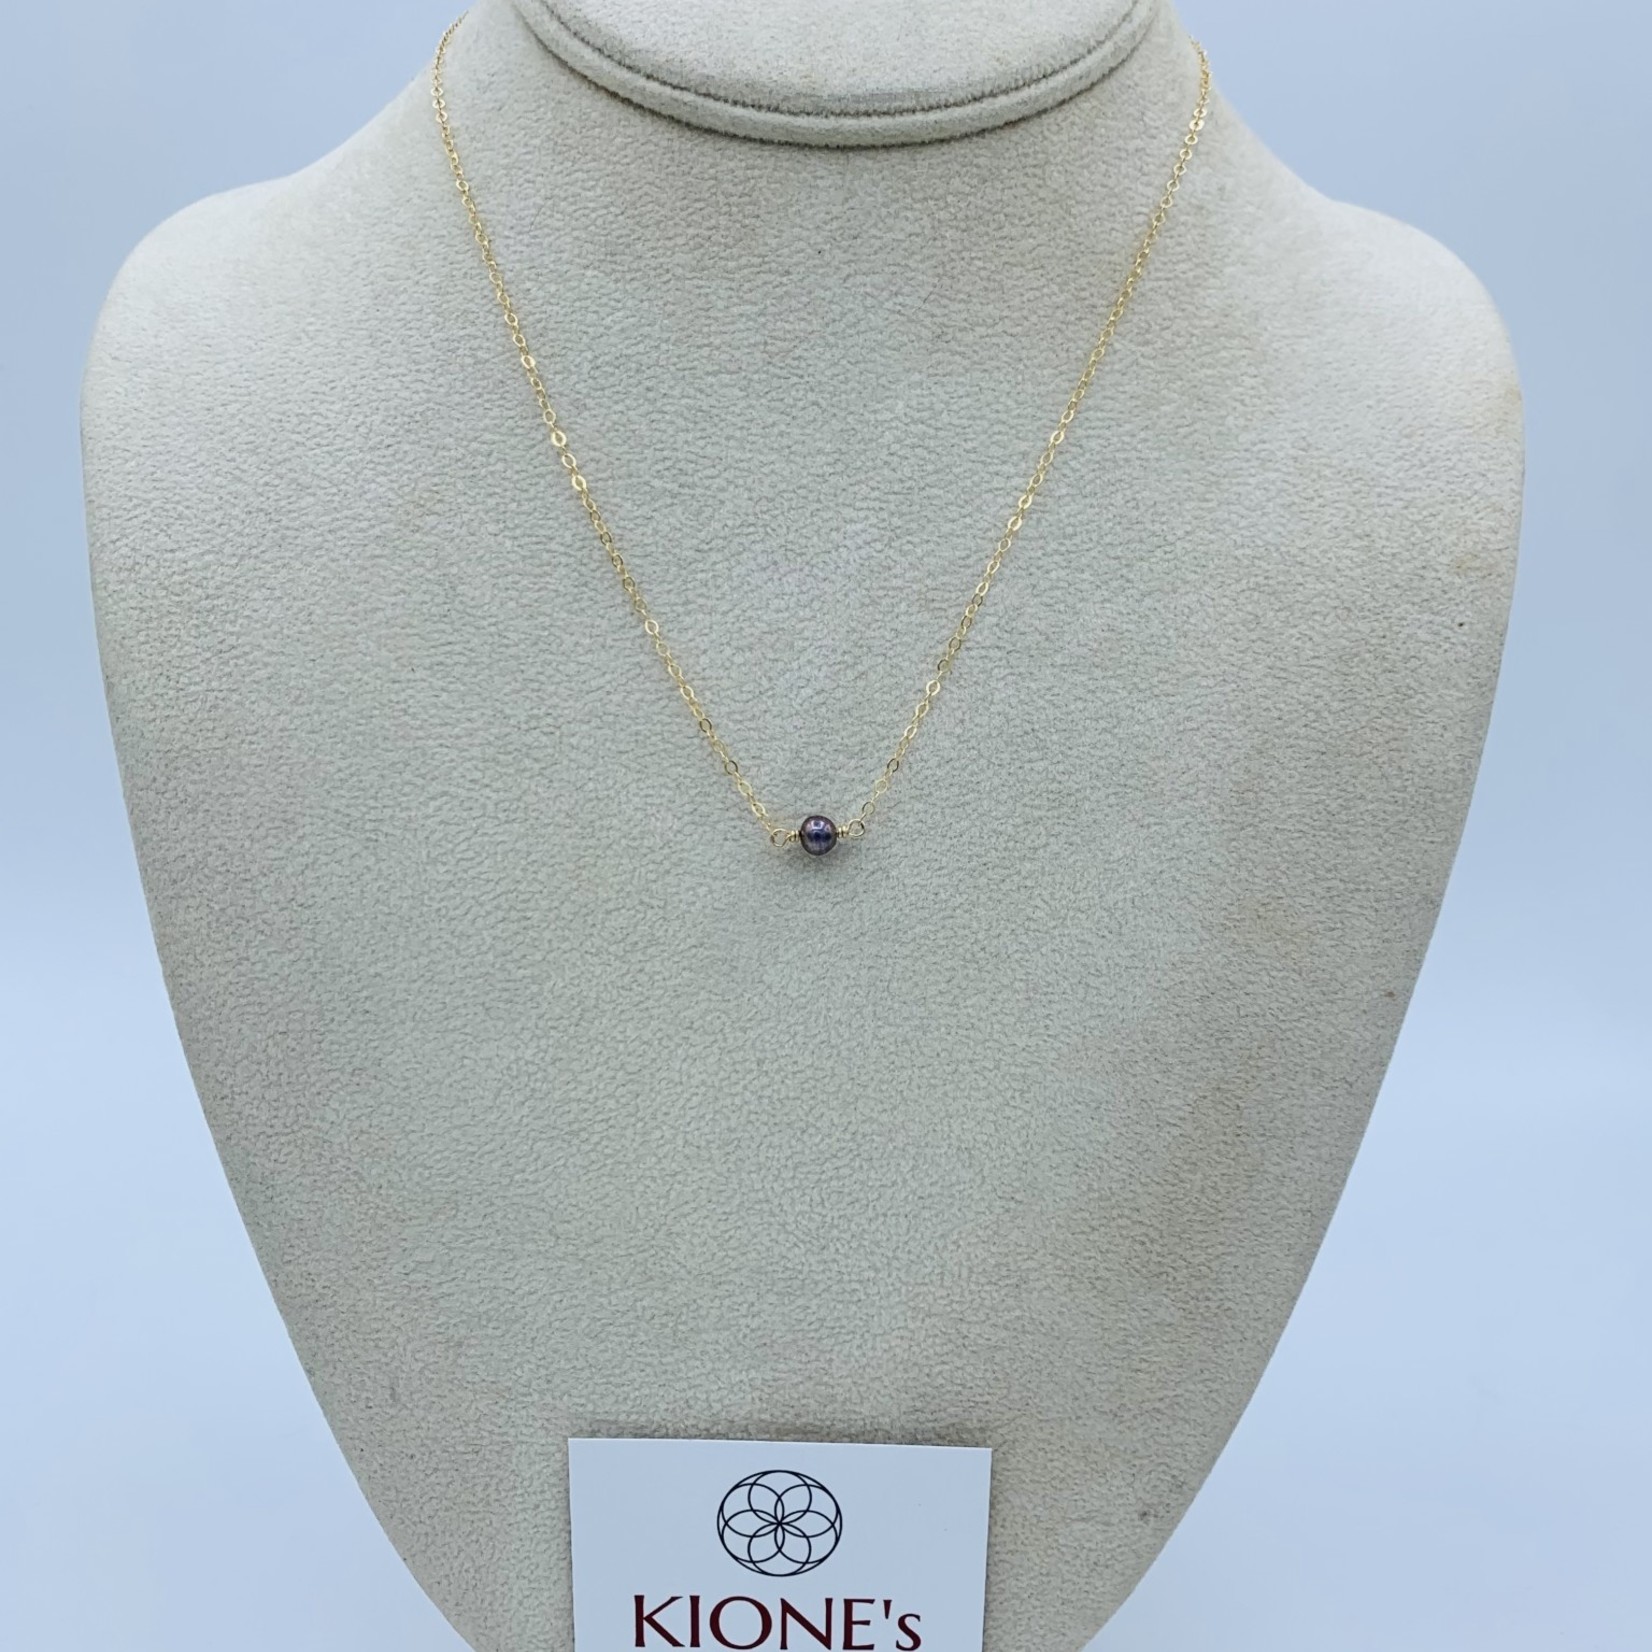 Kione’s Prism Jewelry Solitaire Black Fresh Water Pearl on Yellow Gold Necklace